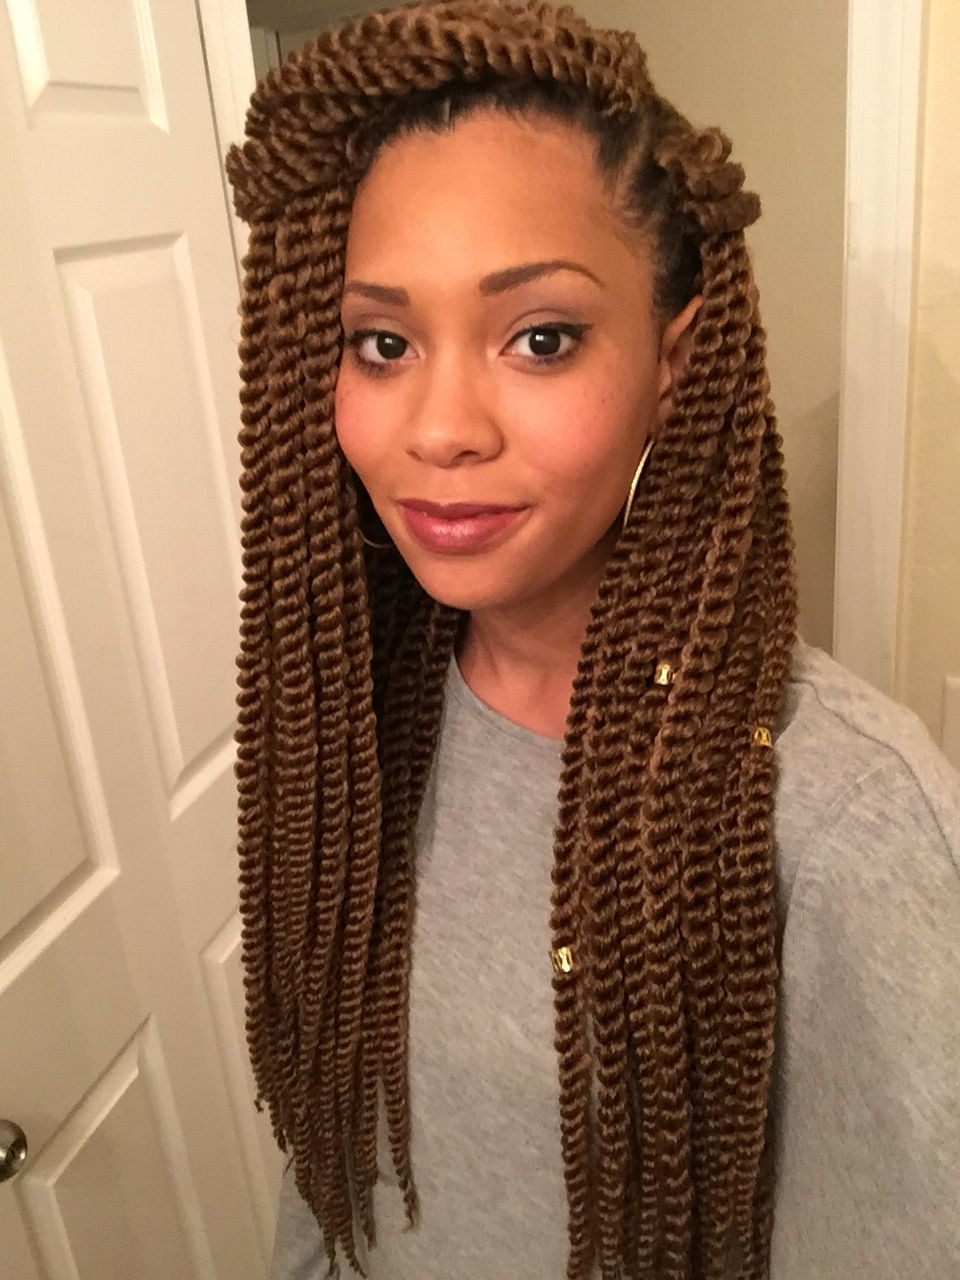 Hairstyles For Crochet Senegalese Twist
 Crochet Senegalese twists protectivehairstyles